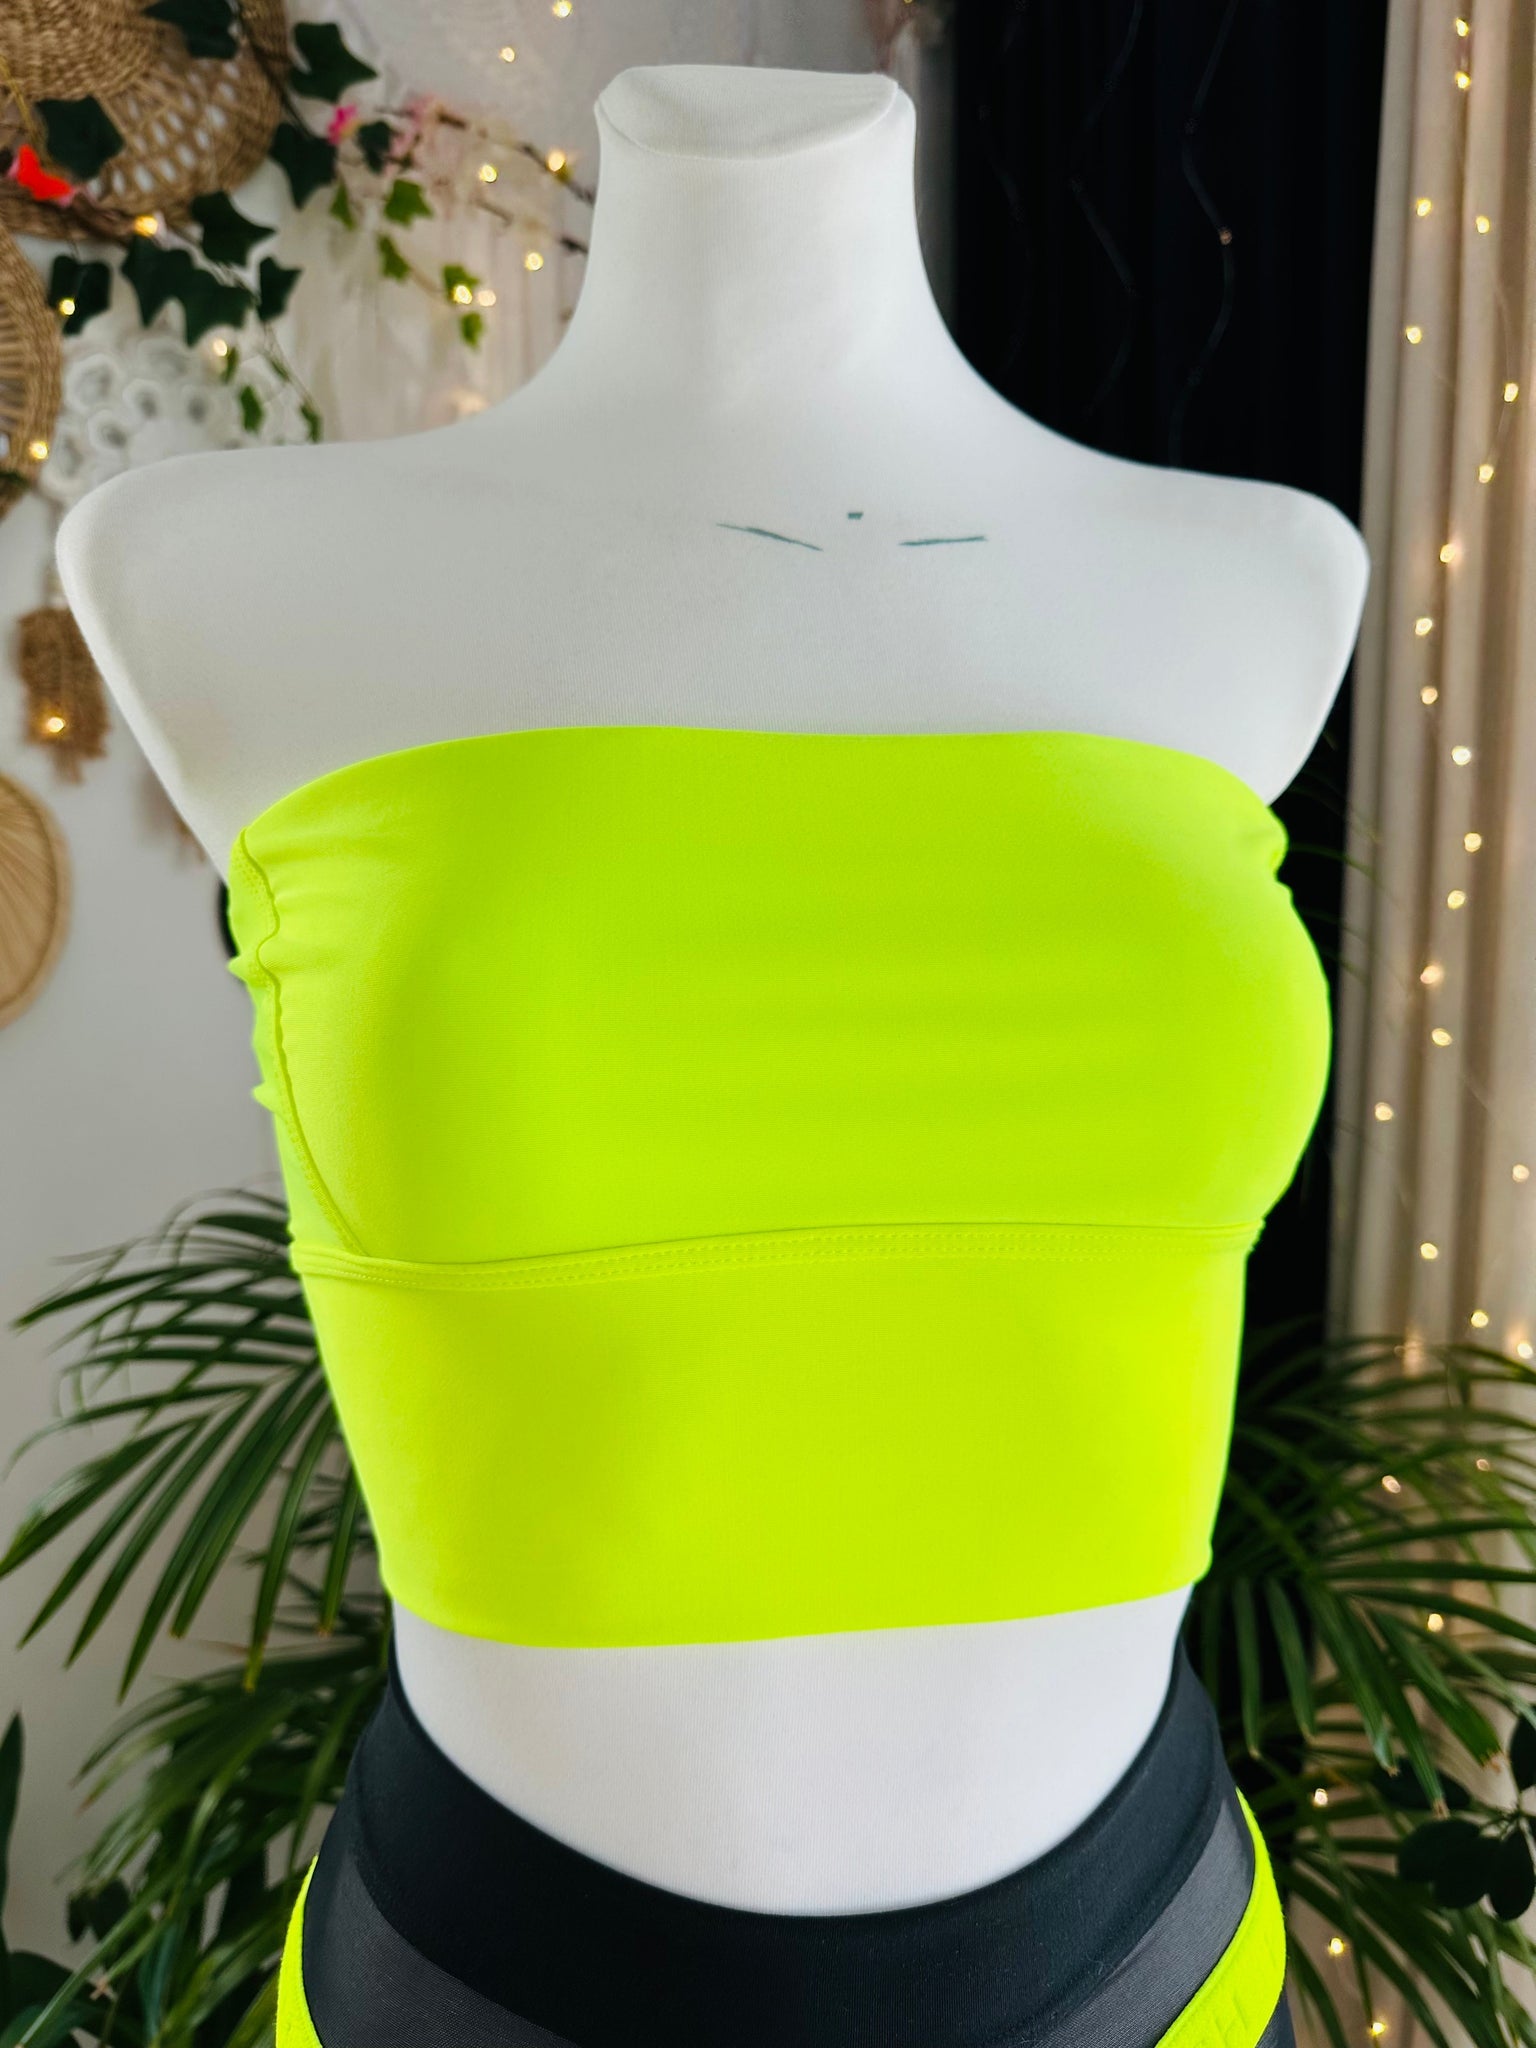 TOP BARDOTTE NEON YELLOW OUTLET -40%